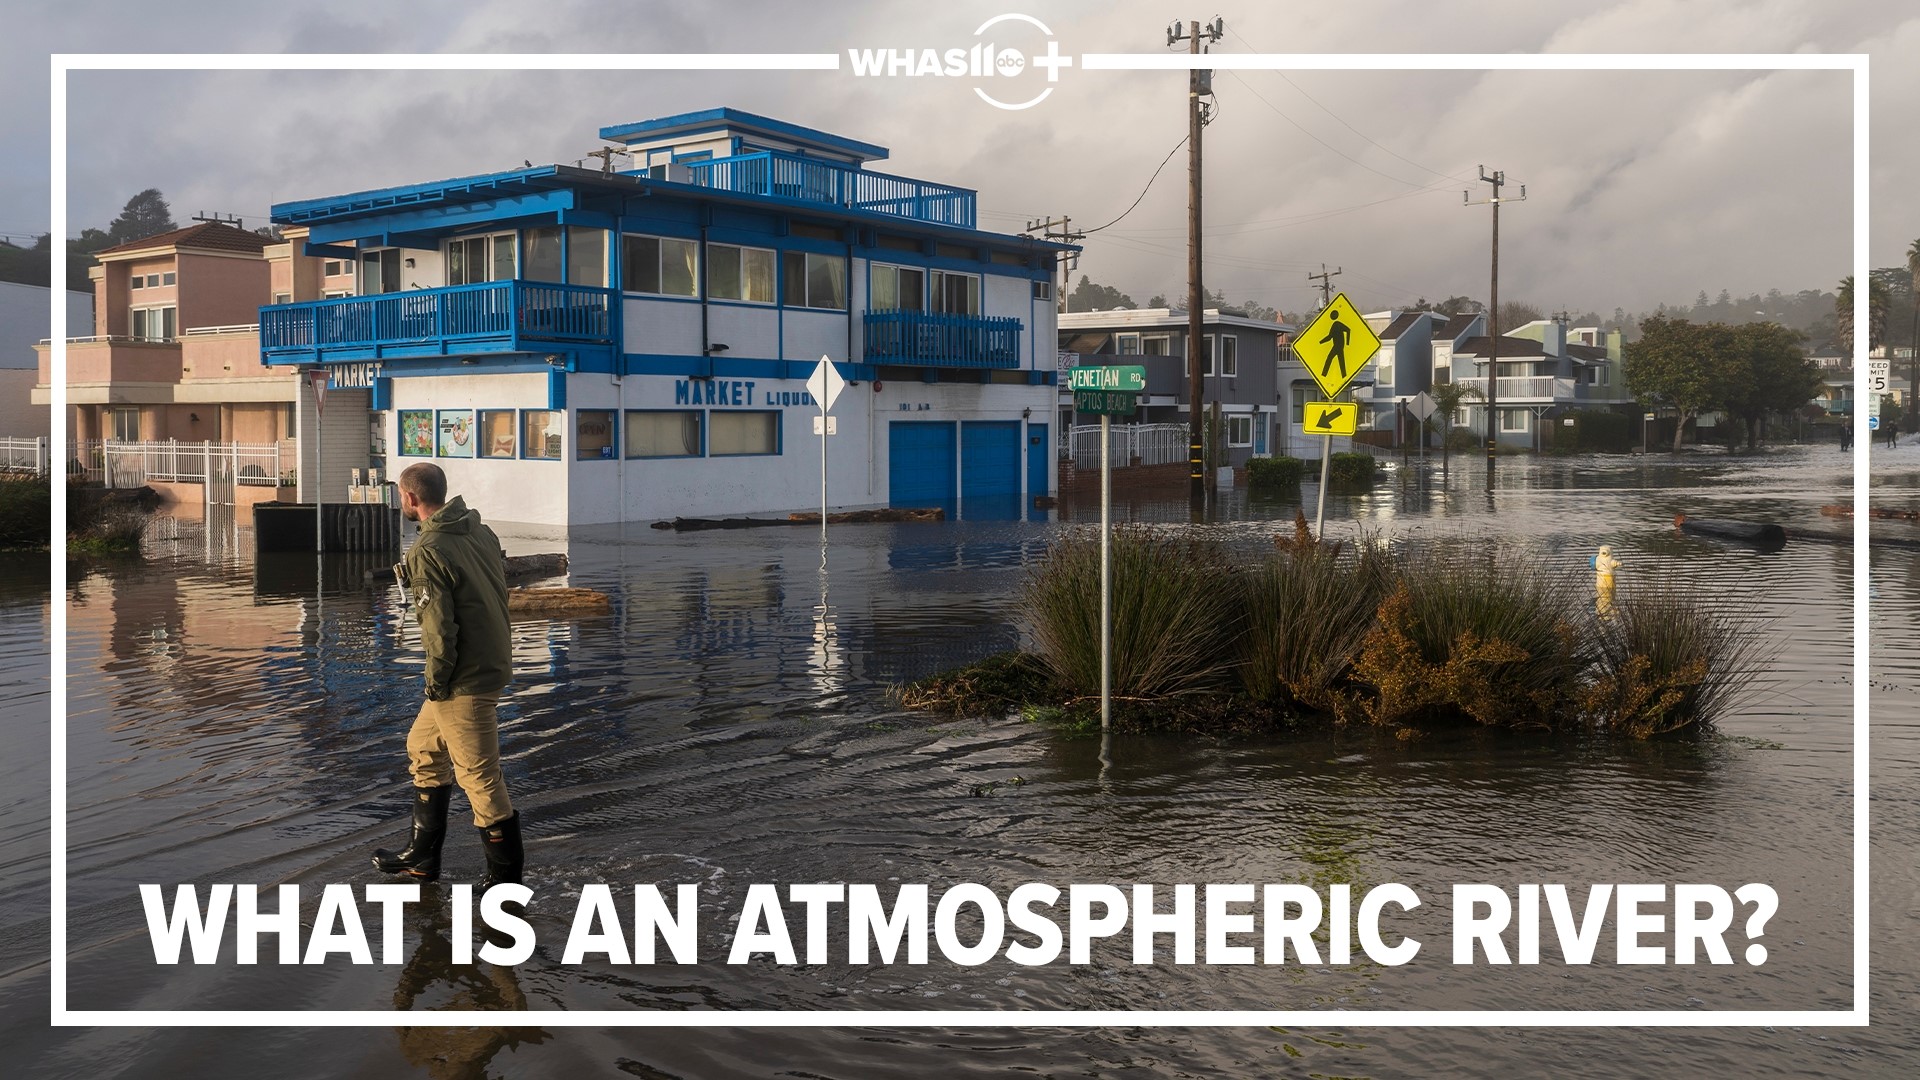 Atmospheric rivers are long, narrow regions of the atmosphere that carry water vapor through the sky, according to NOAA.